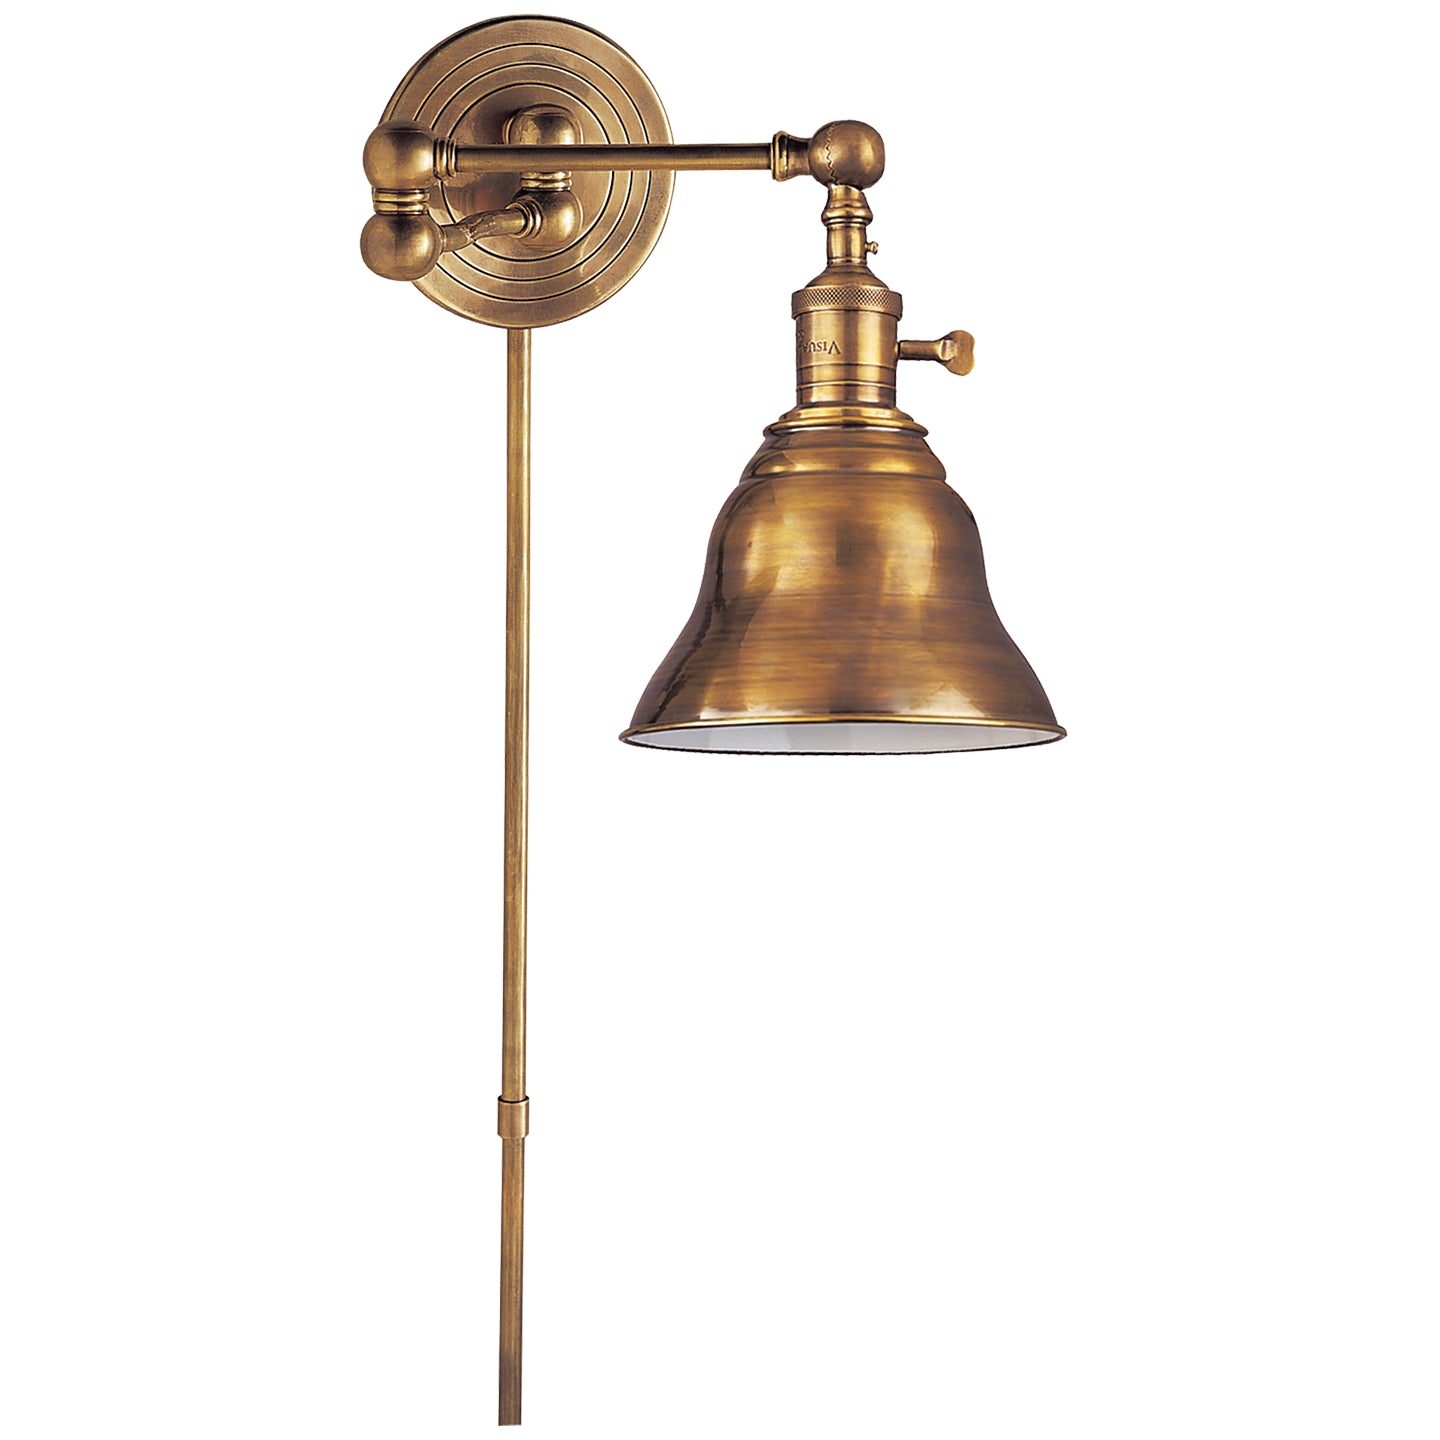 Visual Comfort Signature - SL 2920HAB/SLE-HAB - One Light Wall Sconce - Boston Functional - Hand-Rubbed Antique Brass